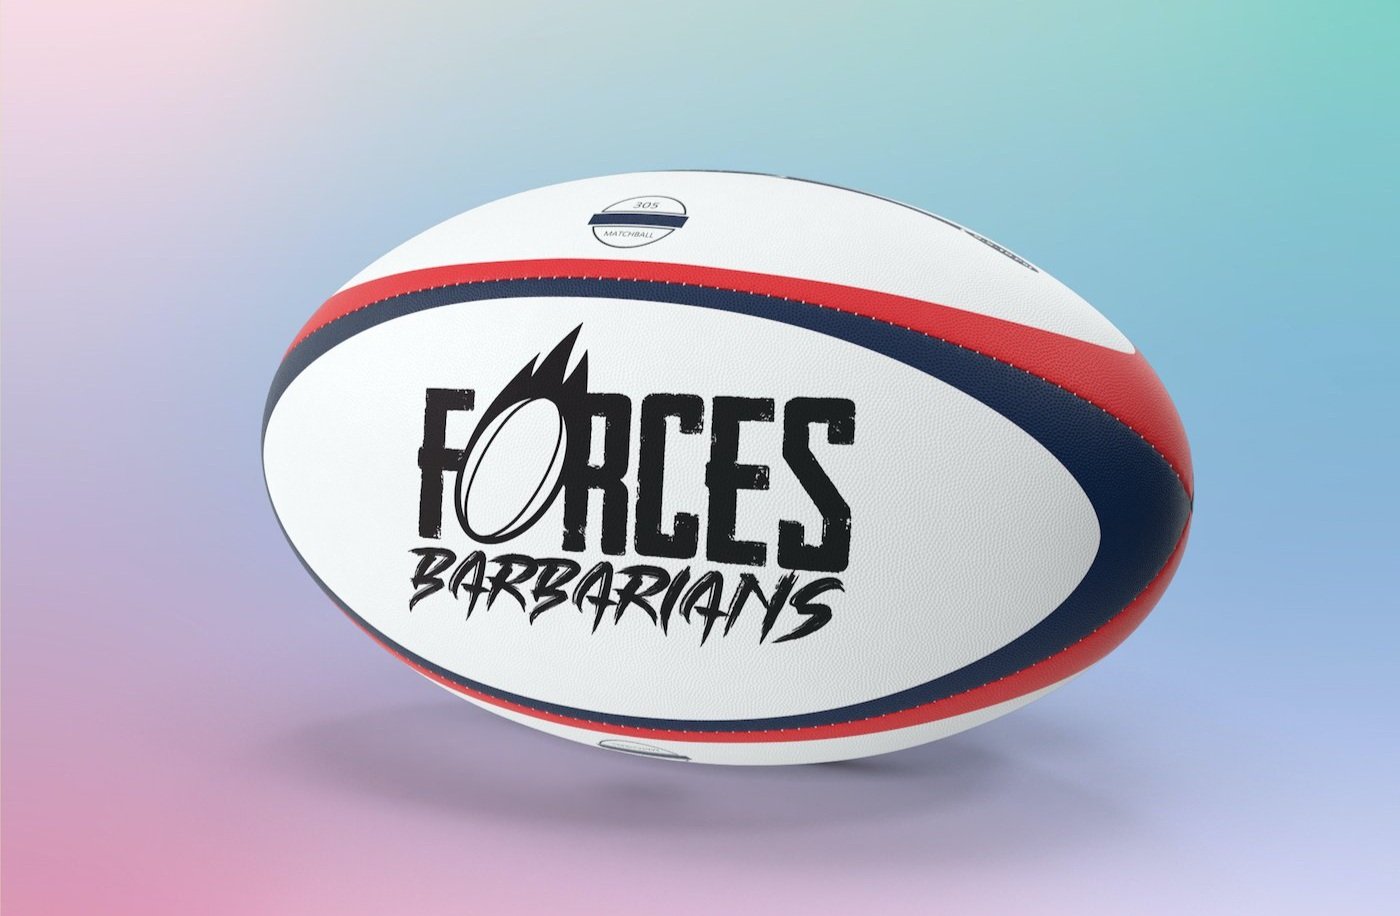 Forces+Barbarians+rugby+ball+mockup+2.jpg